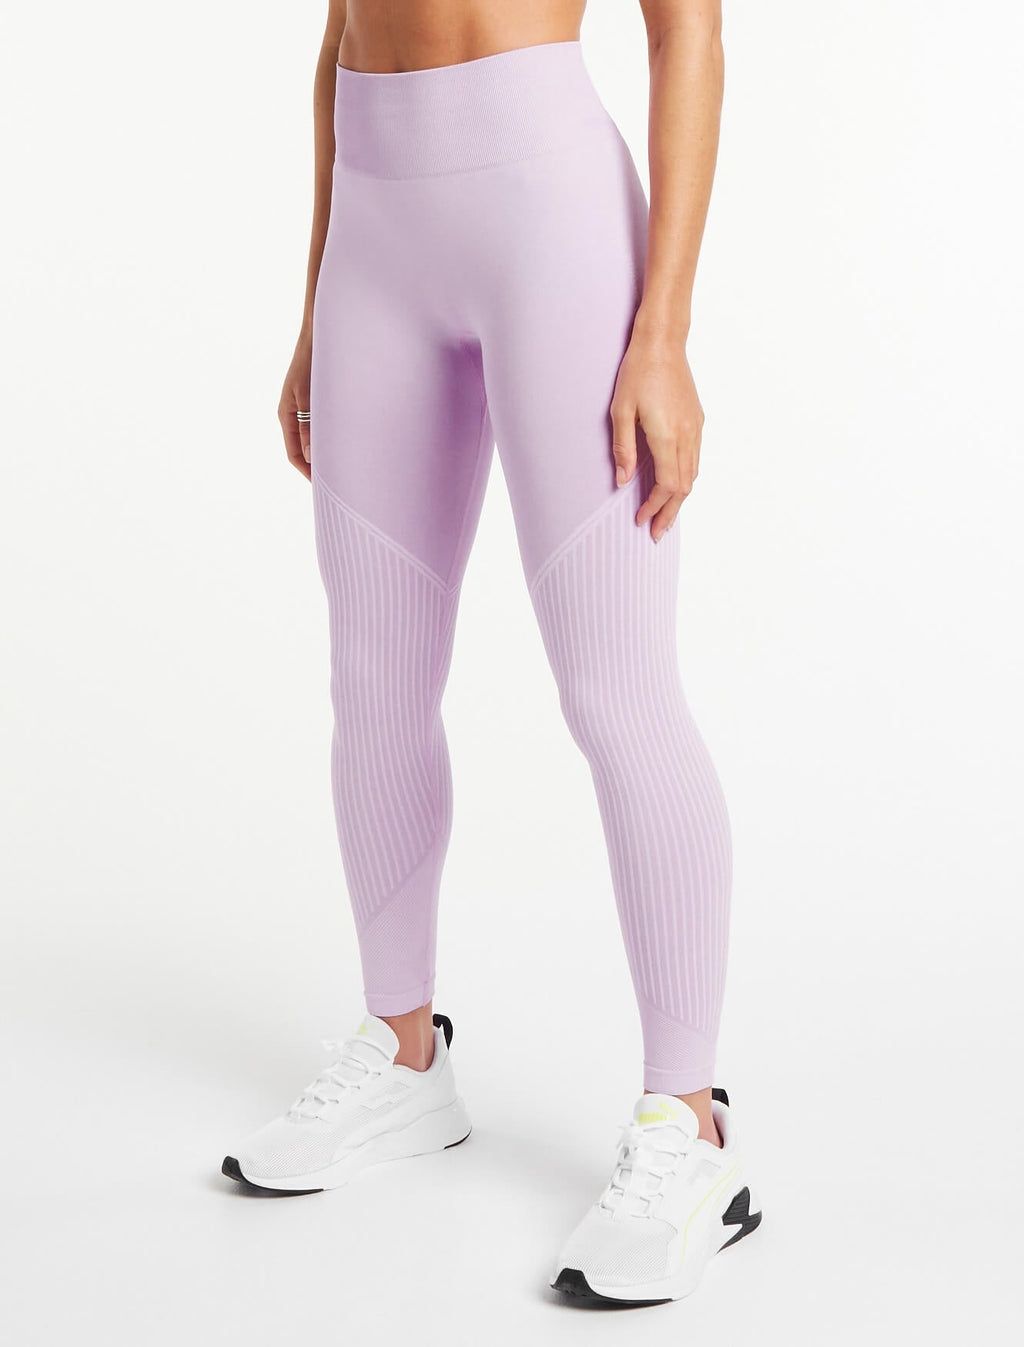 products/womens-afterglow-seamless-leggings-lilac-mist.jpg